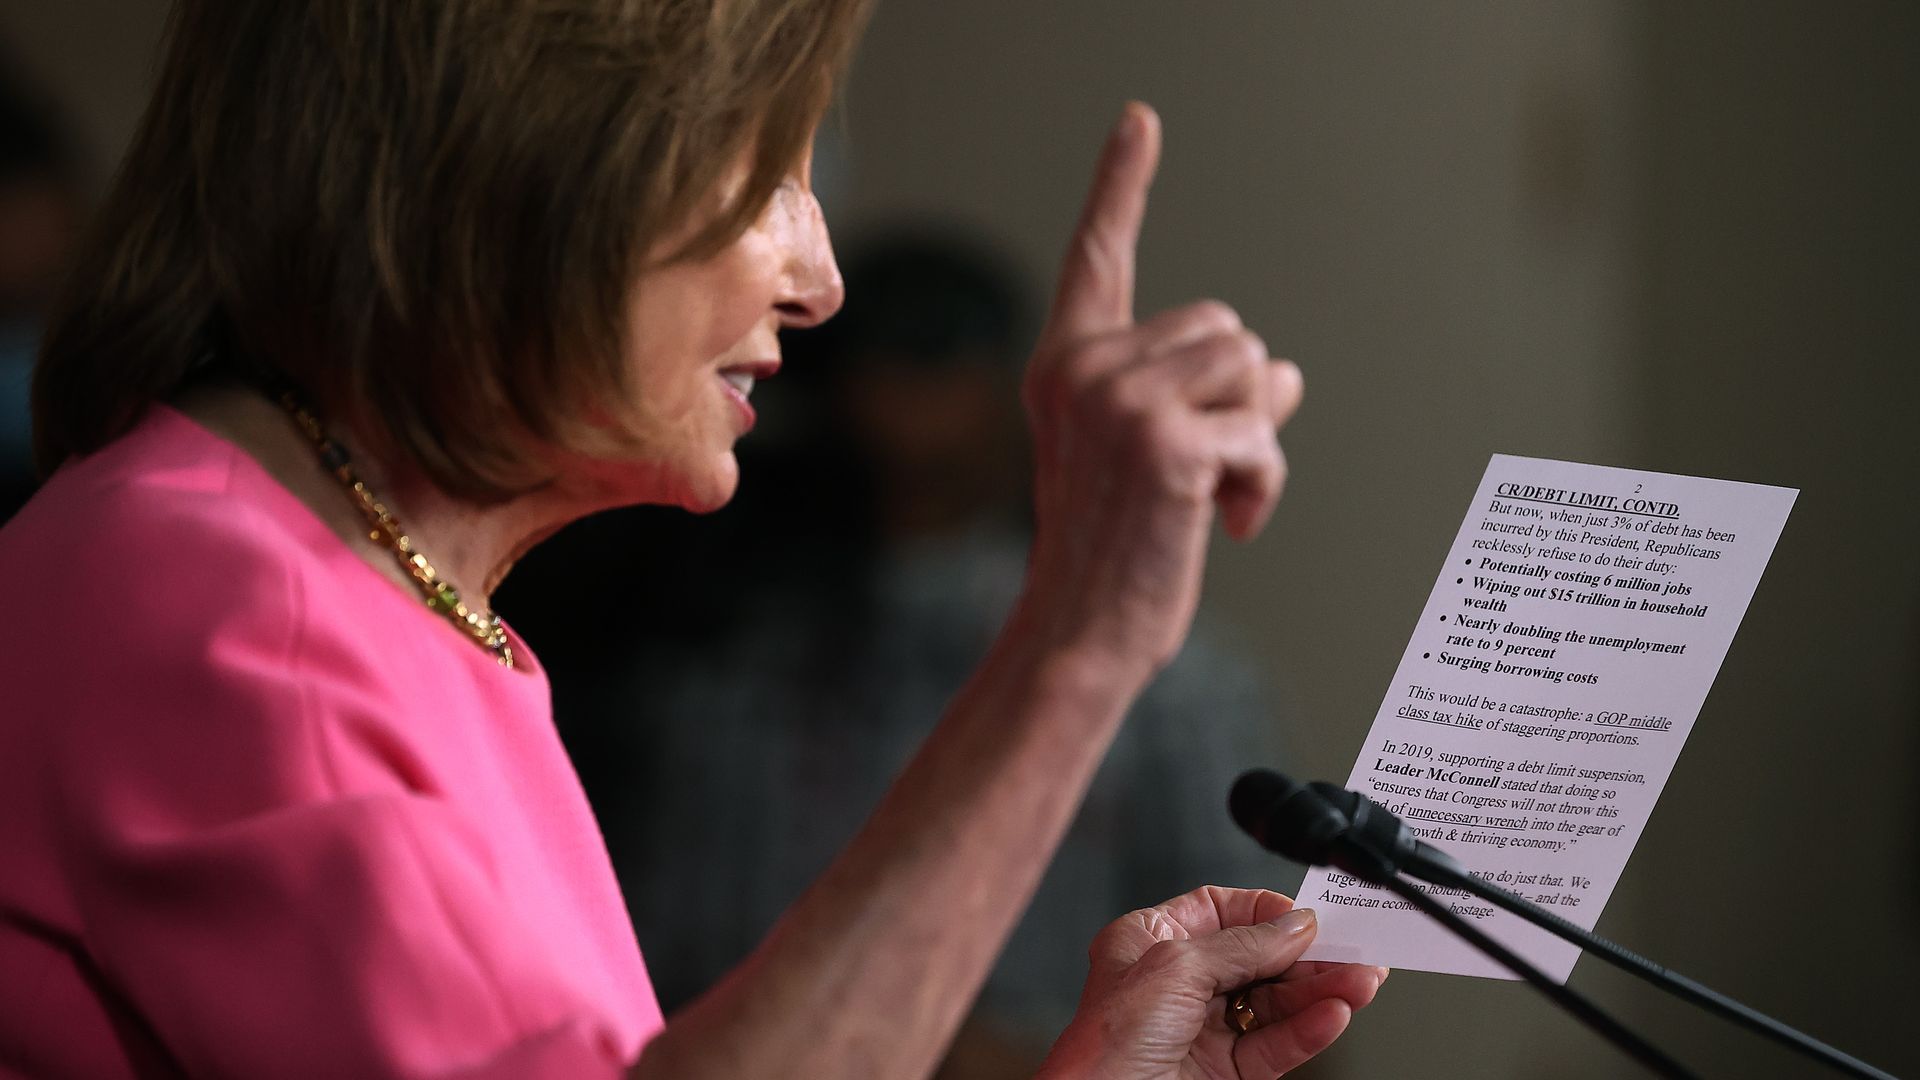 House Speaker Nancy Pelosi is seen reading back a quote from Senate Minority Leader Mitch McConnell during a news conference.